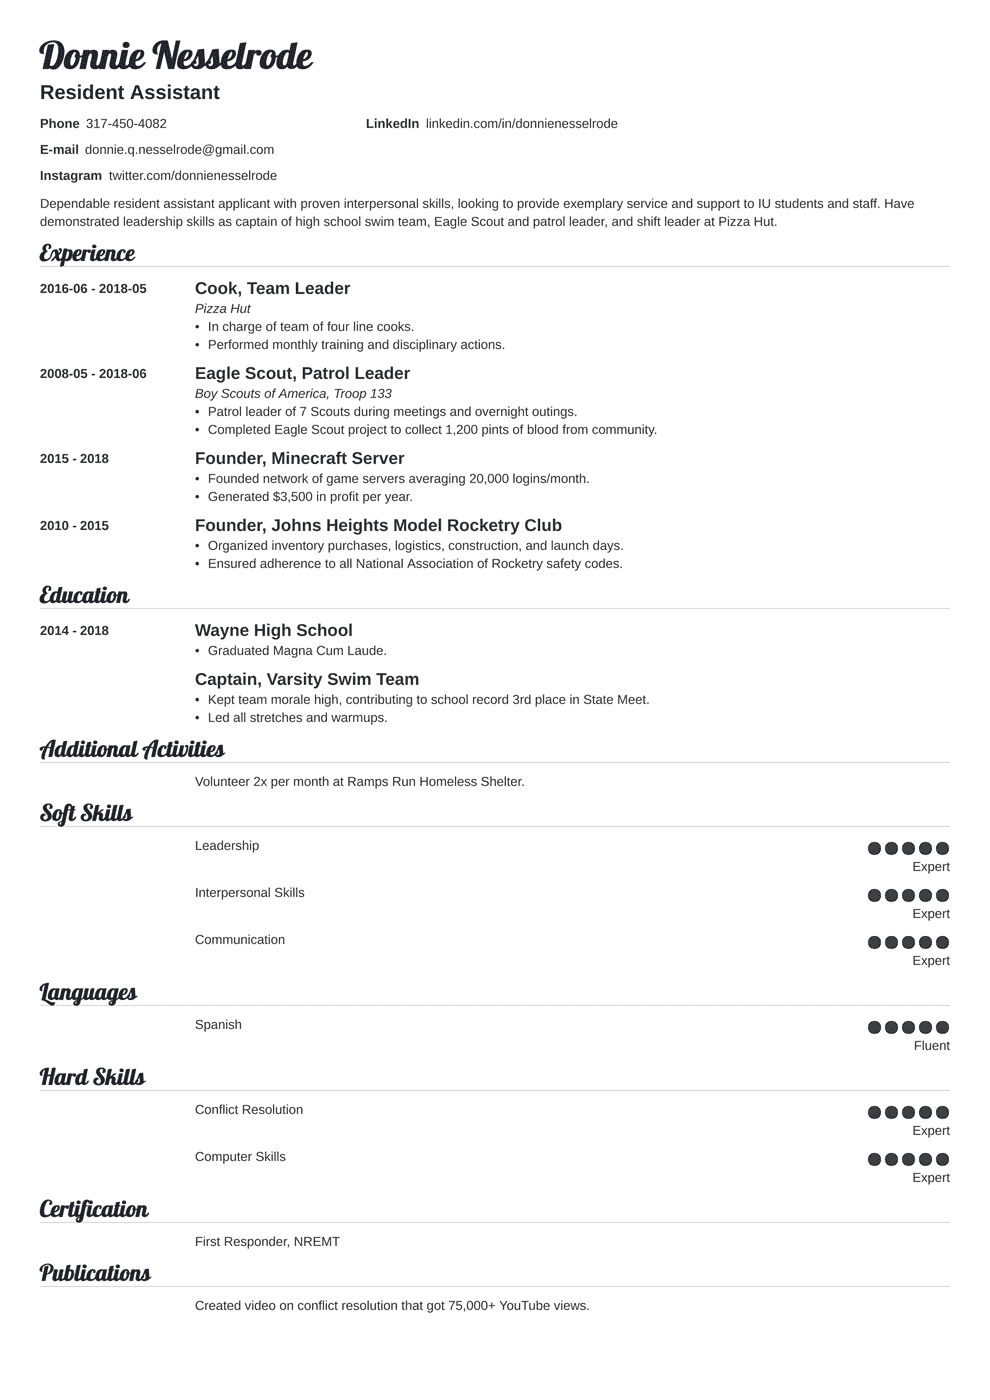 Resume For Resident Assistant